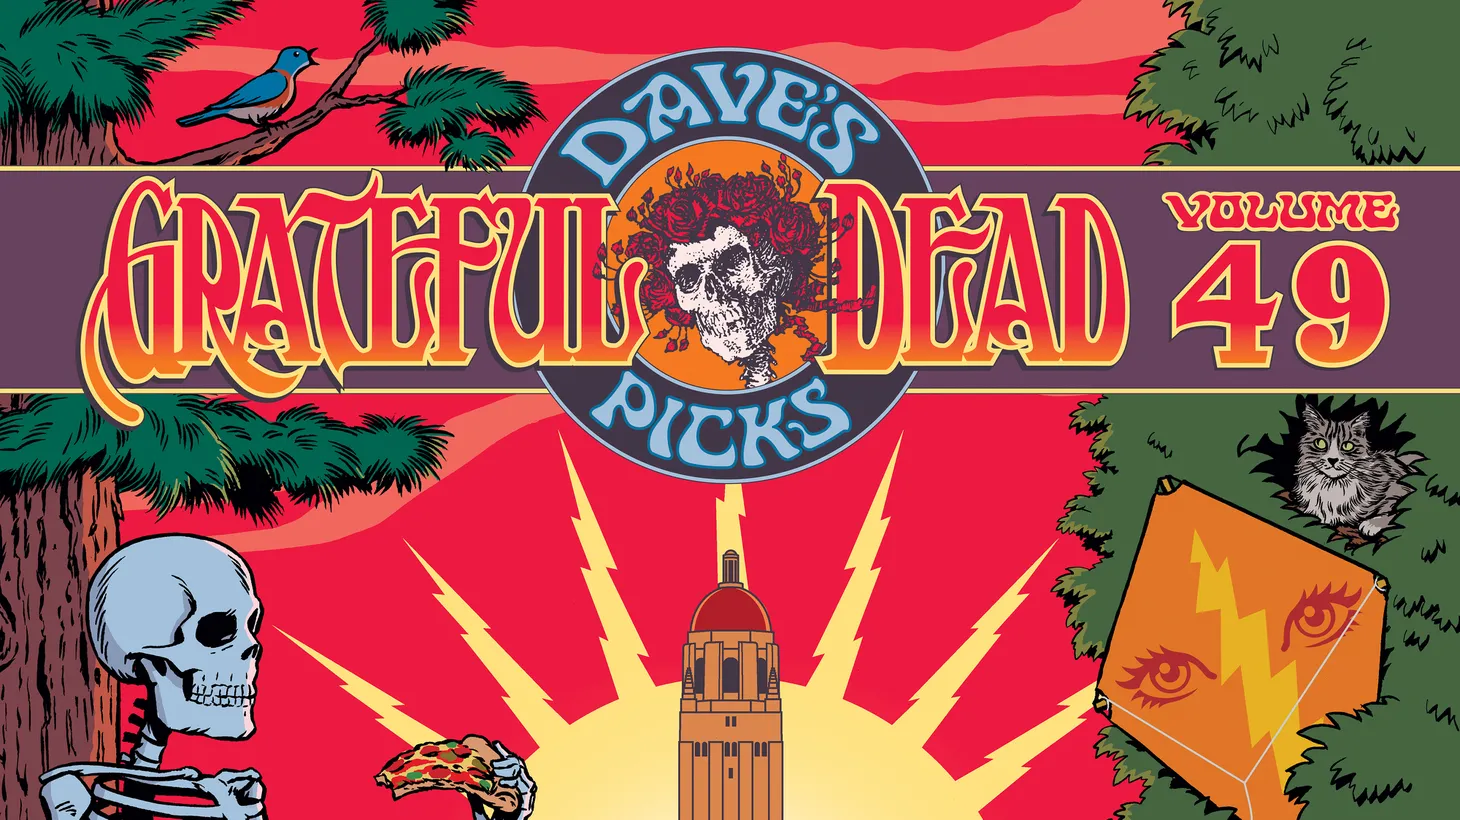 What's behind the Grateful Dead's staying power?, Press Play